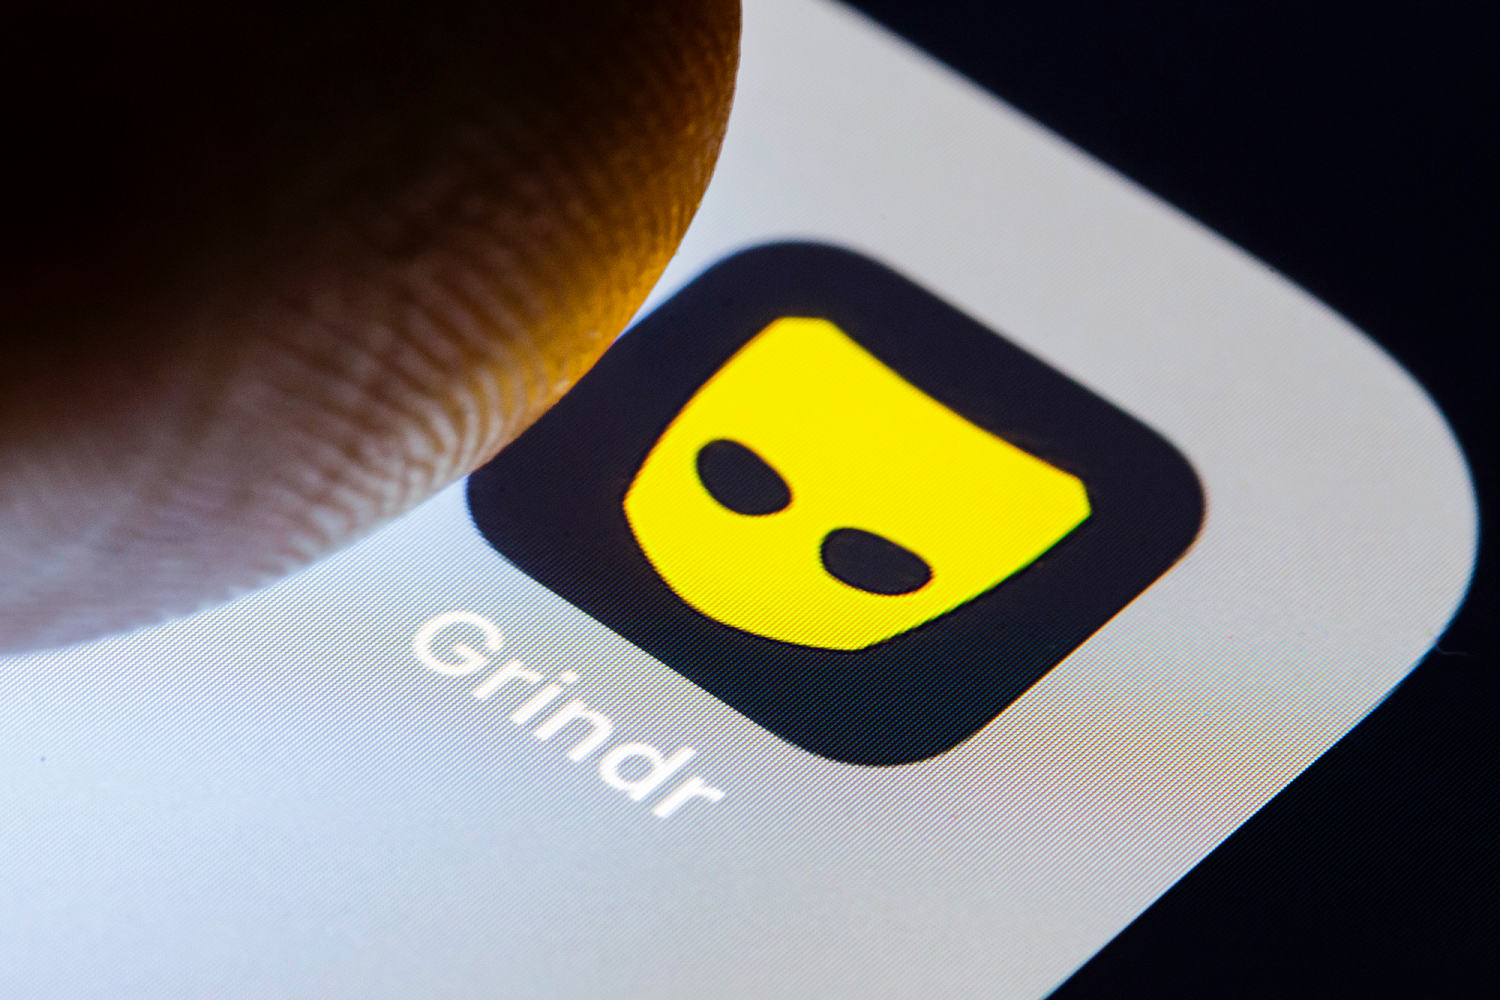 Grindr facing U.K. lawsuit over alleged data protection breaches